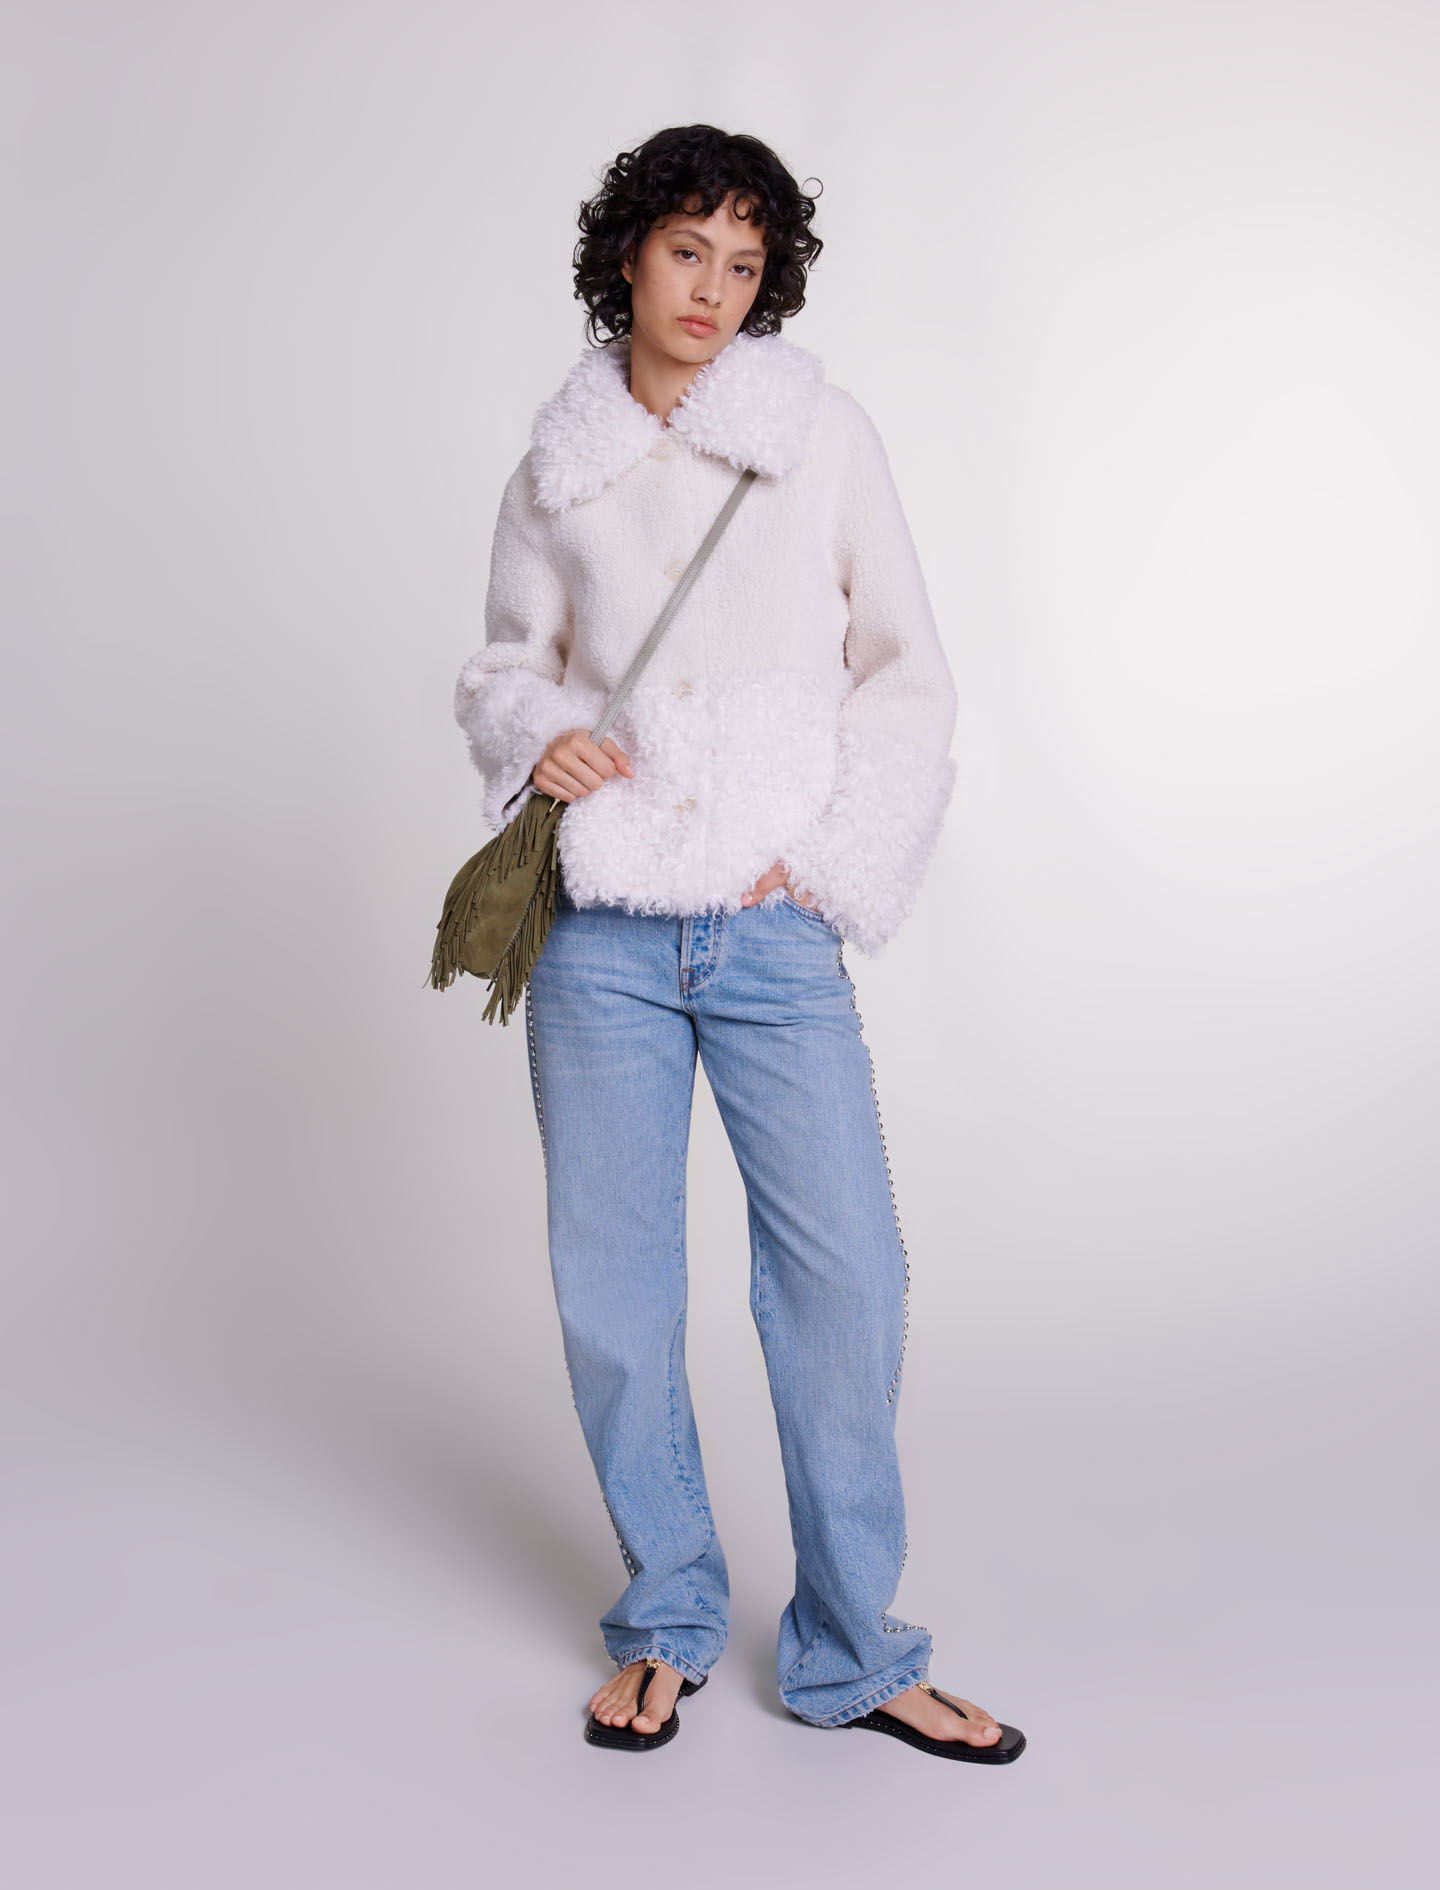 Maje Woman's polyester Lining: Short fake fur coat for Fall/Winter, in color Ecru / Beige